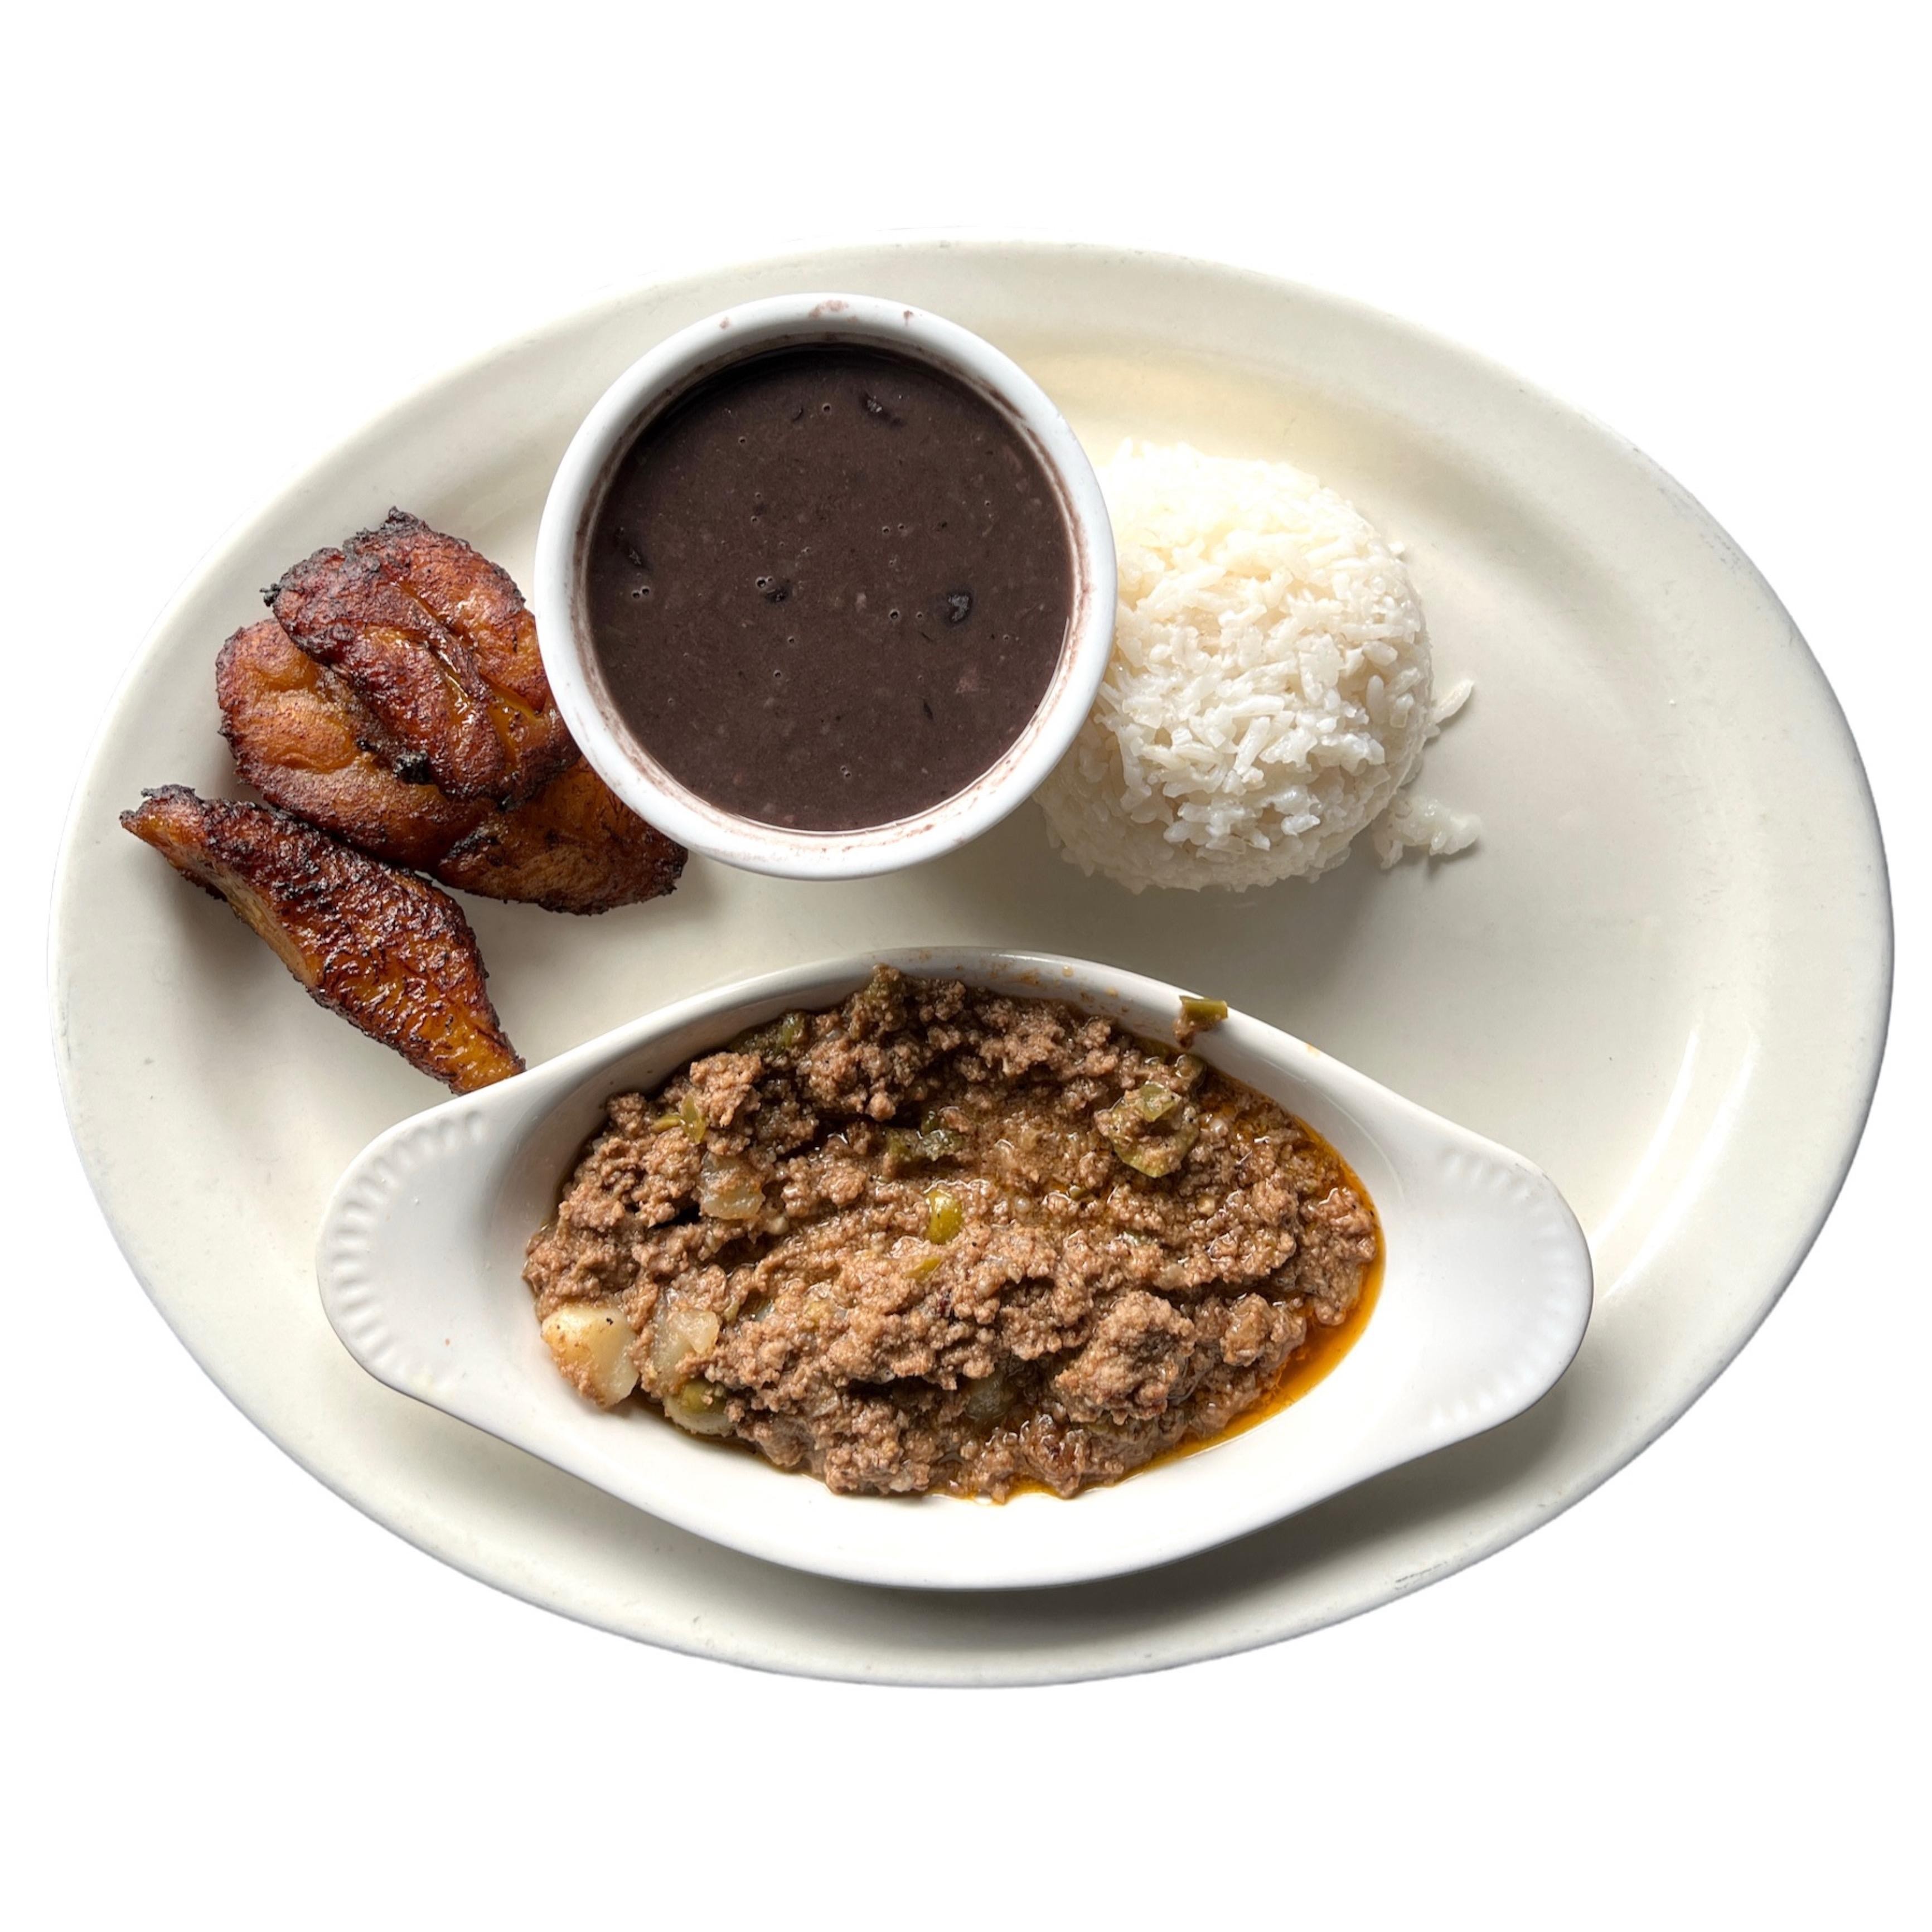 Picadillo Platter - Simple, Traditional